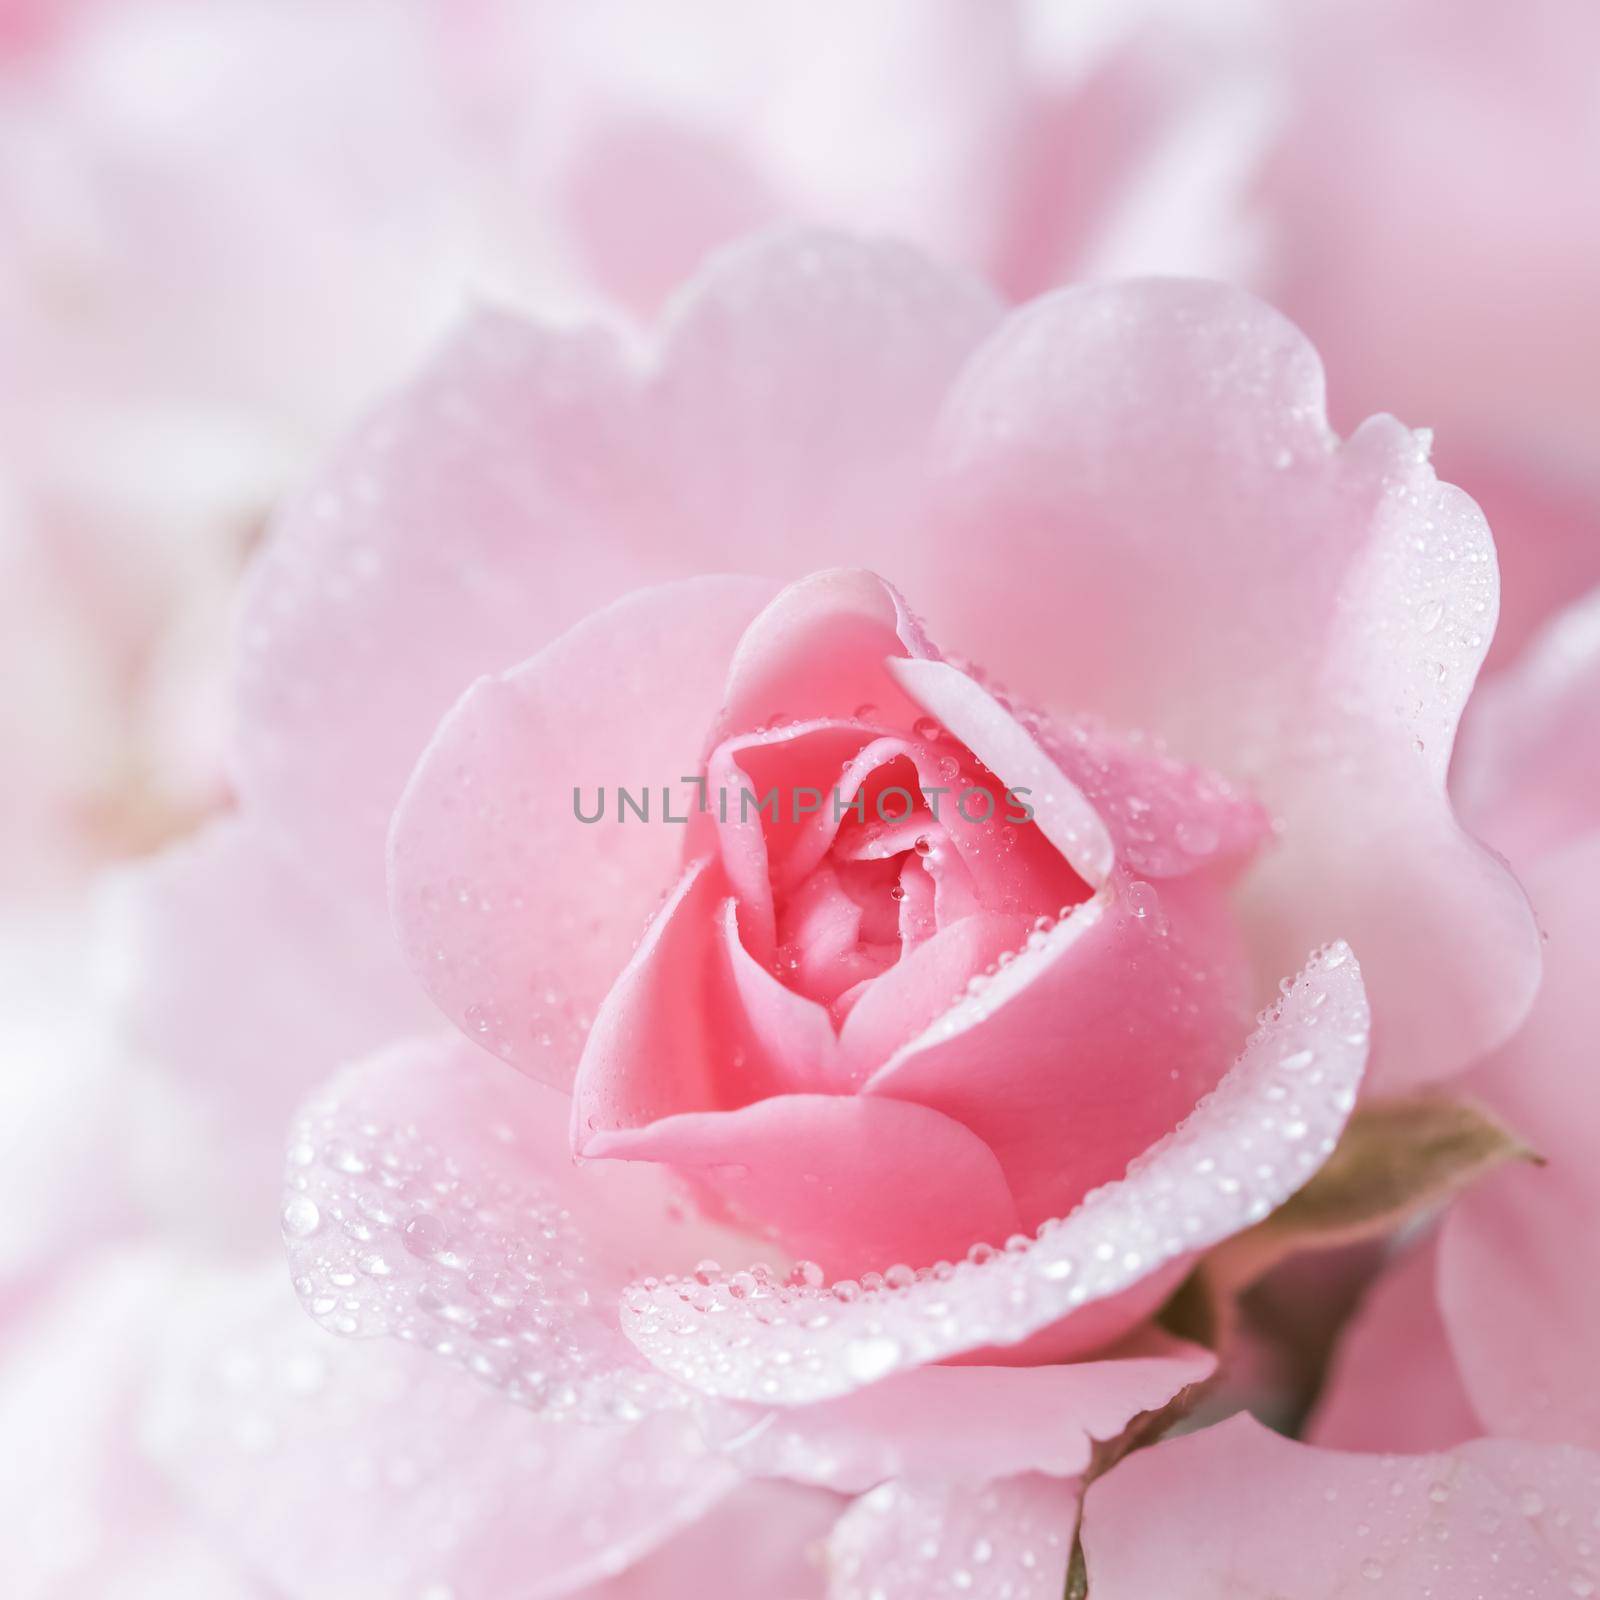 Beautiful pink rose with water drops. Can be used as background. Soft focus. Romantic style